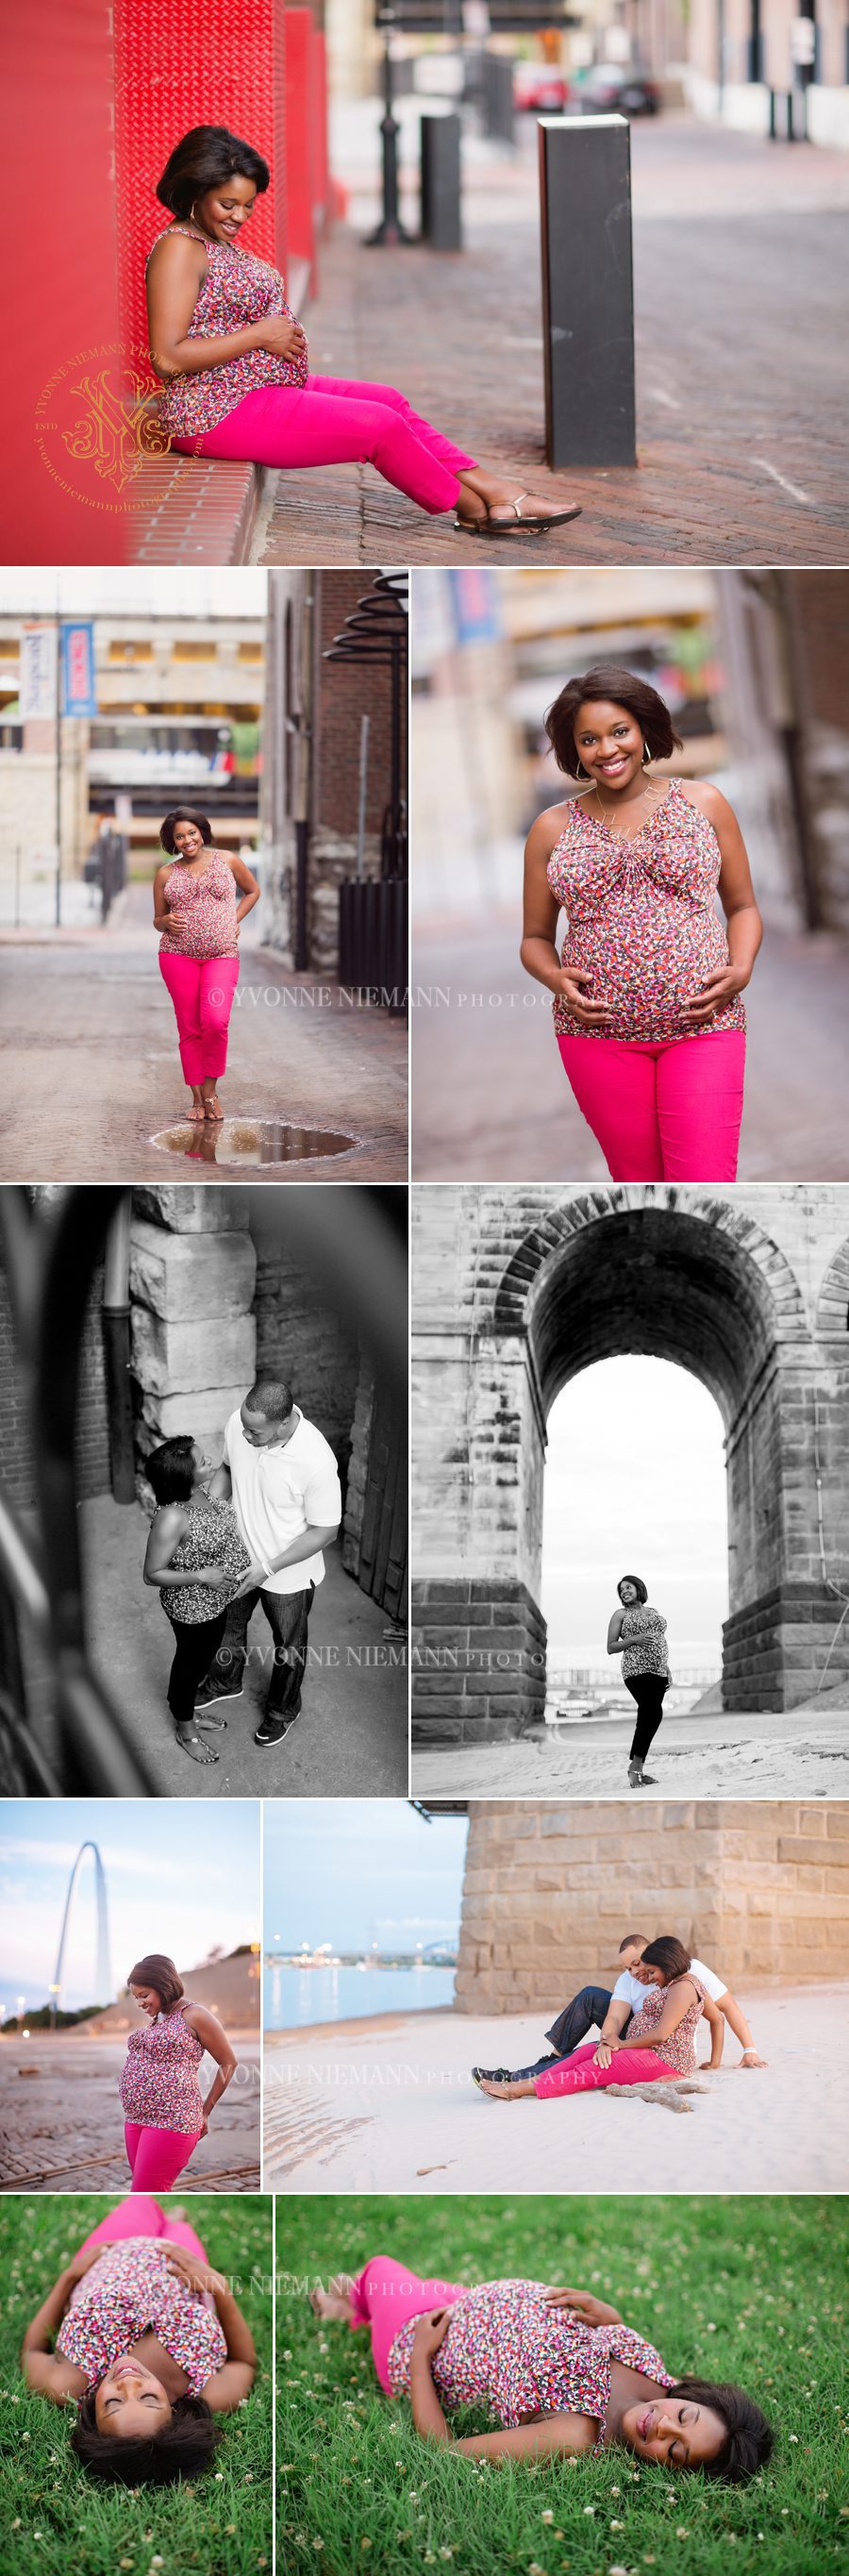 St. Louis City maternity photos taken at the Landing by Yvonne Niemann Photography.